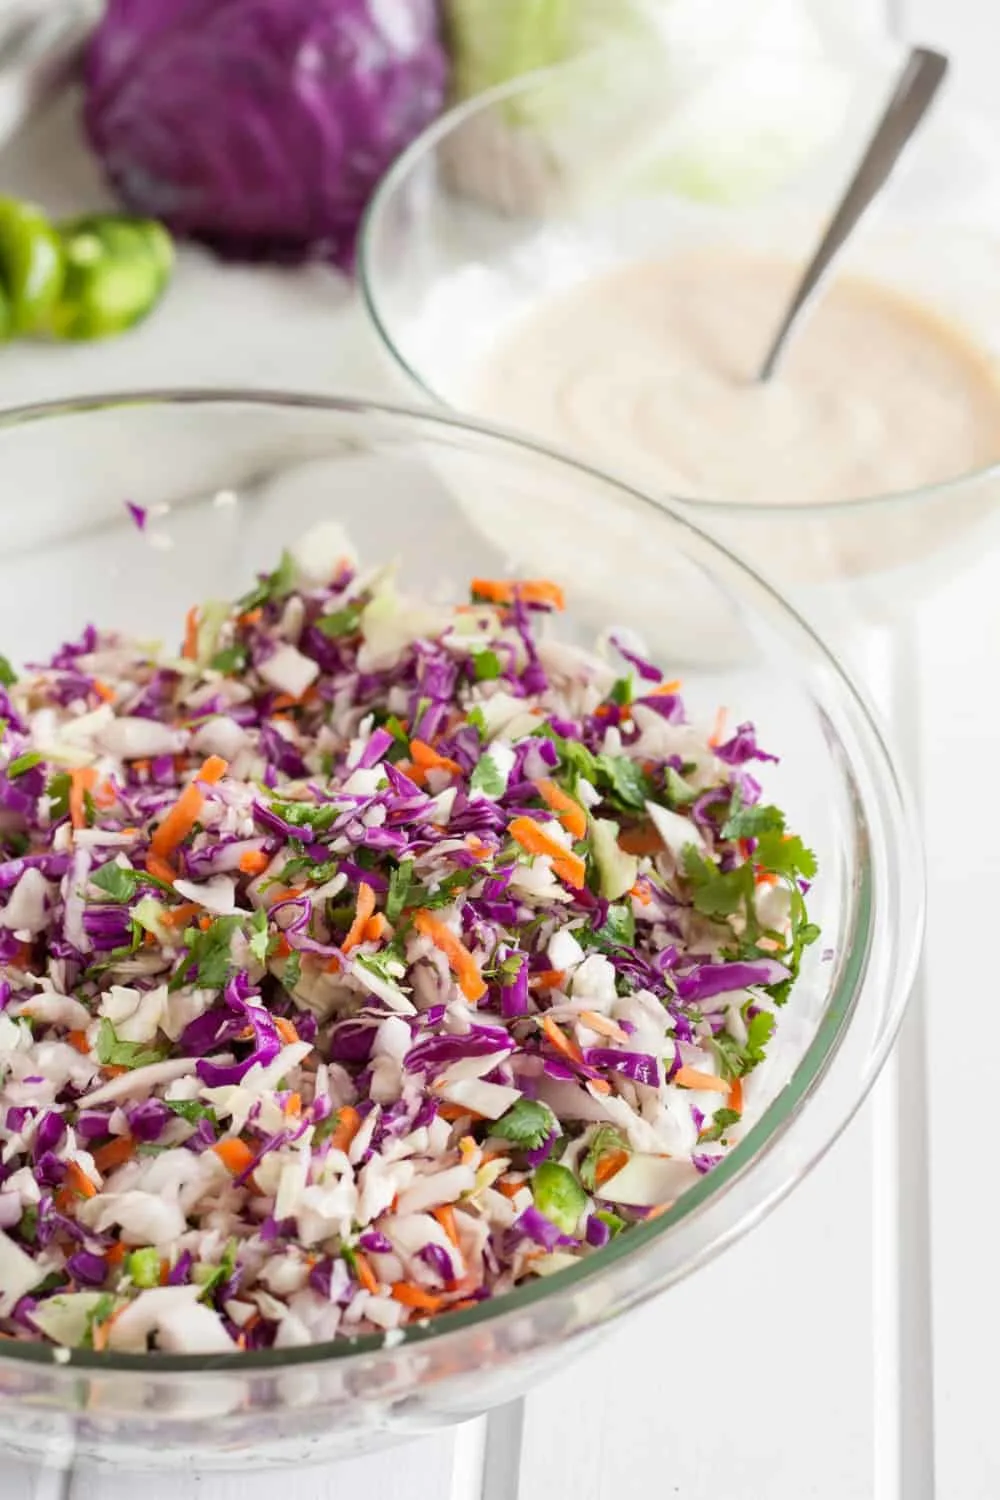 Creamy crunchy cilantro lime coleslaw makes a perfect side dish for tacos, a BBQ, or as a salad. This coleslaw recipe is a deliciously light and refreshing twist. The simple healthy The combination of cabbage, red cabbage, carros, cilantro, with your choice of mayo, sour cream, or greek yogurt make a creamy coleslaw that you will want to make over and over again. #coleslaw #sidedish #cabbage #recipe #healthy #creamy